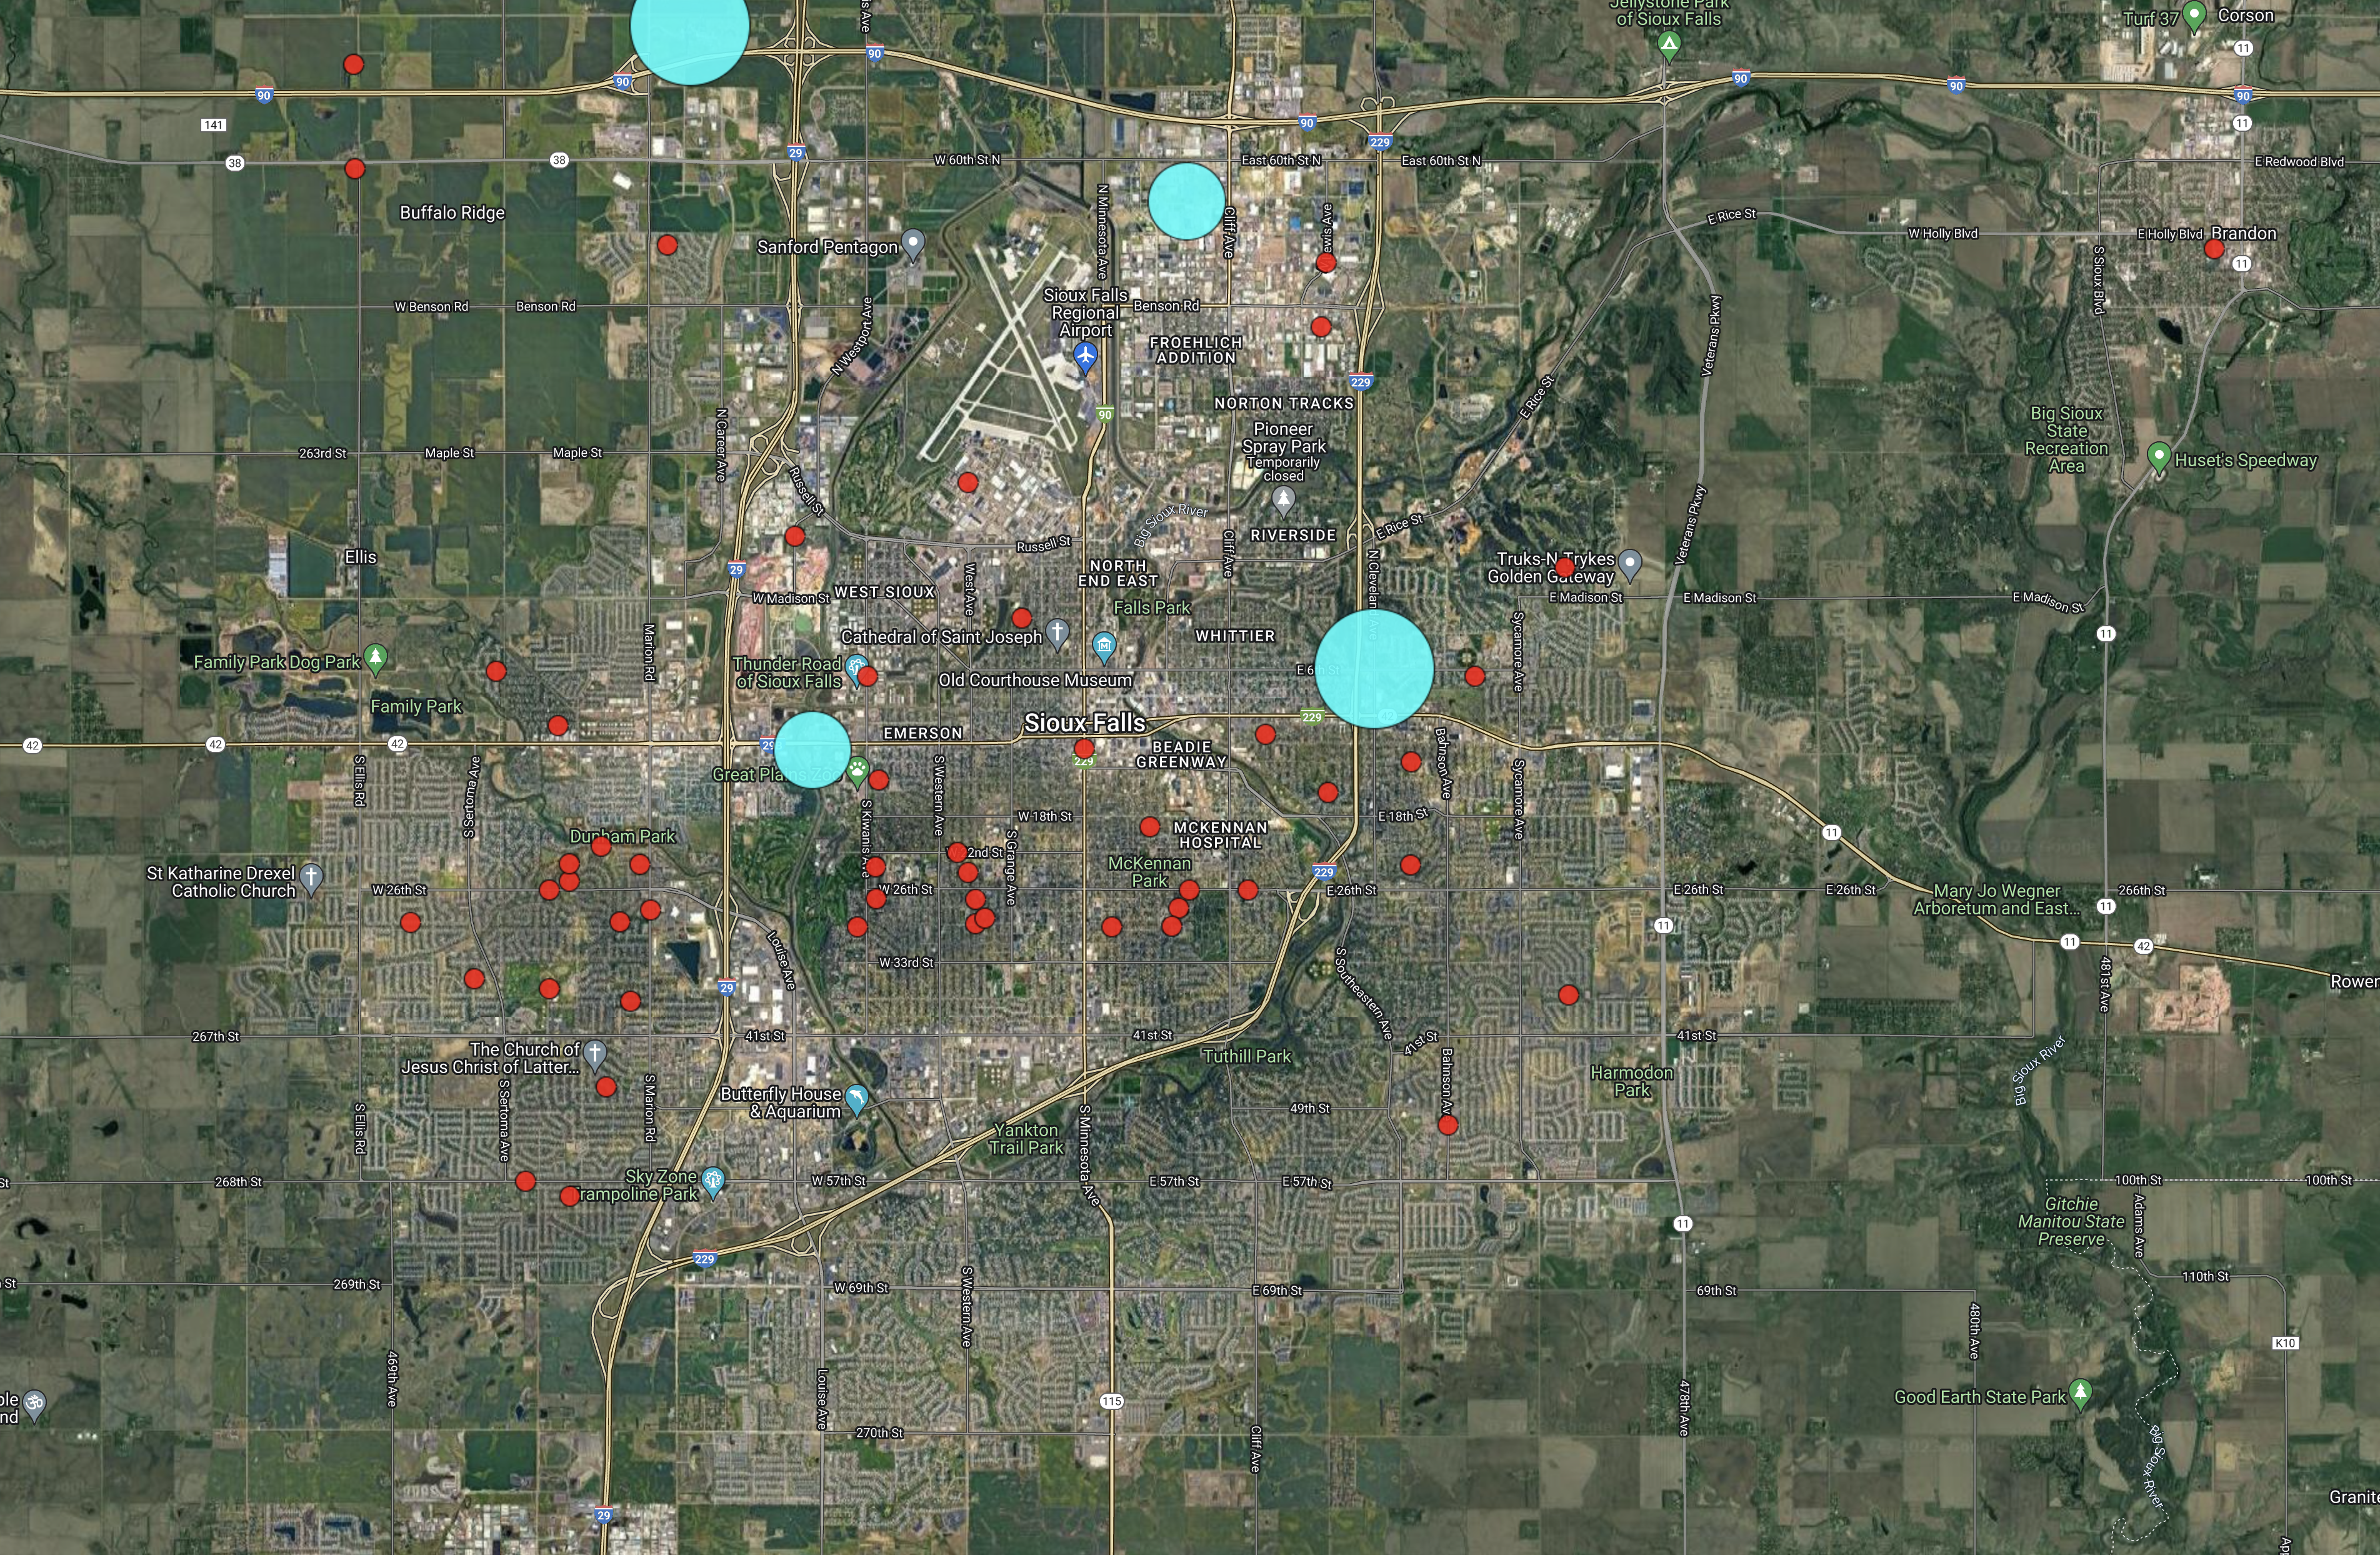 Confirmed EAB locations around greater Sioux Falls. Red dots indicate at least one infested tree. Blue dots indicate larger infestations with visible dead and dying trees.